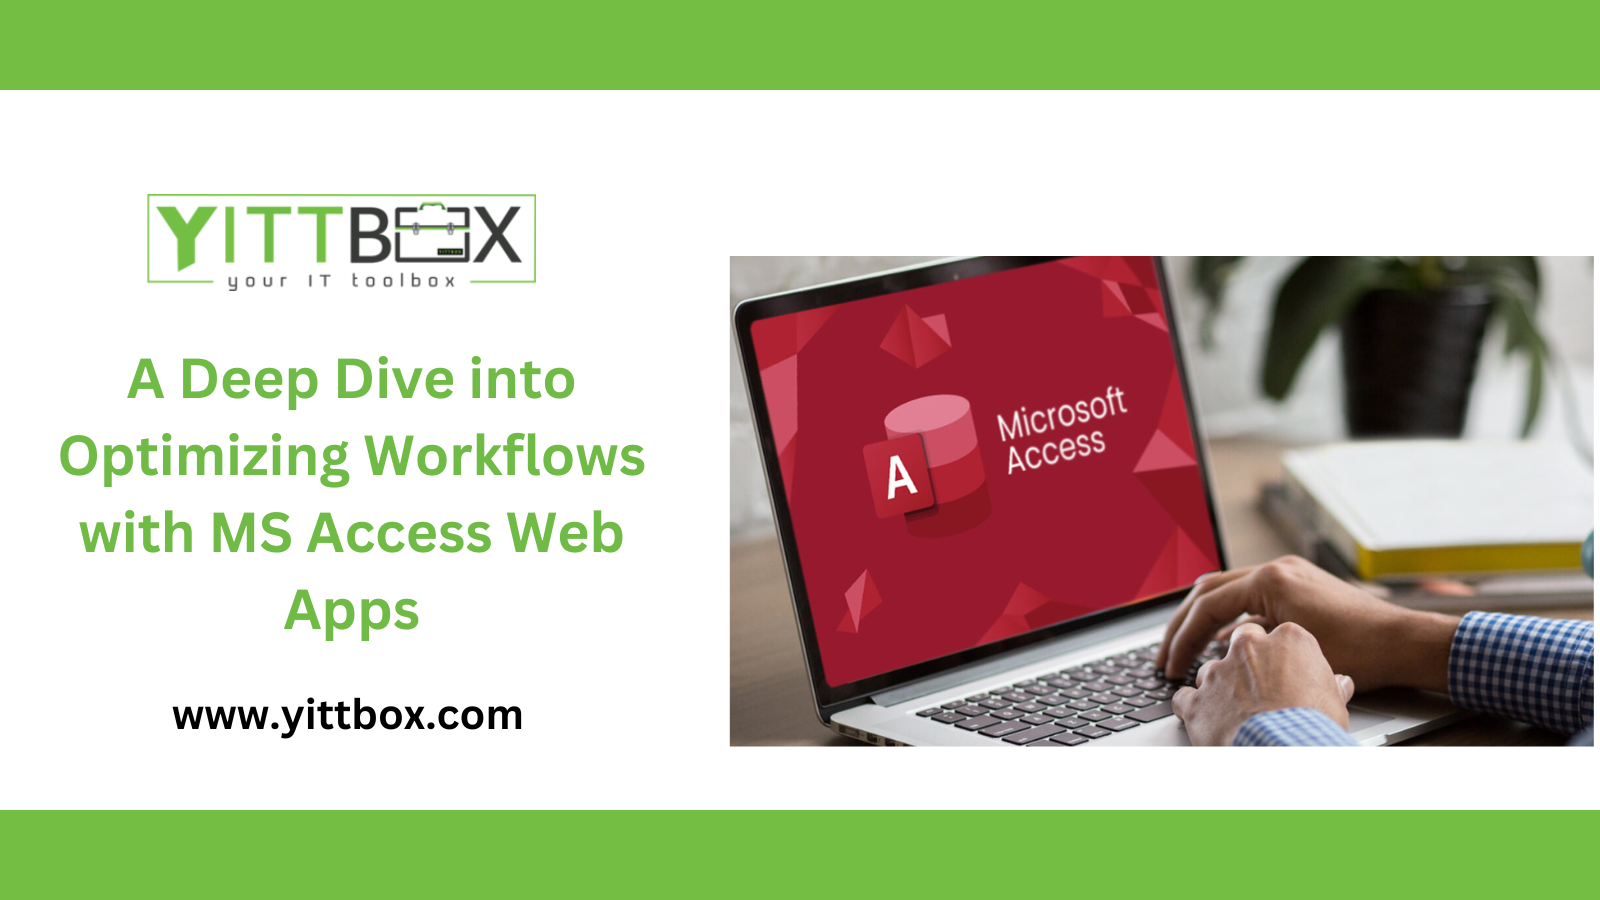 Maximizing Operational Efficiency: A Deep Dive into Optimizing Workflows with MS Access Web Apps